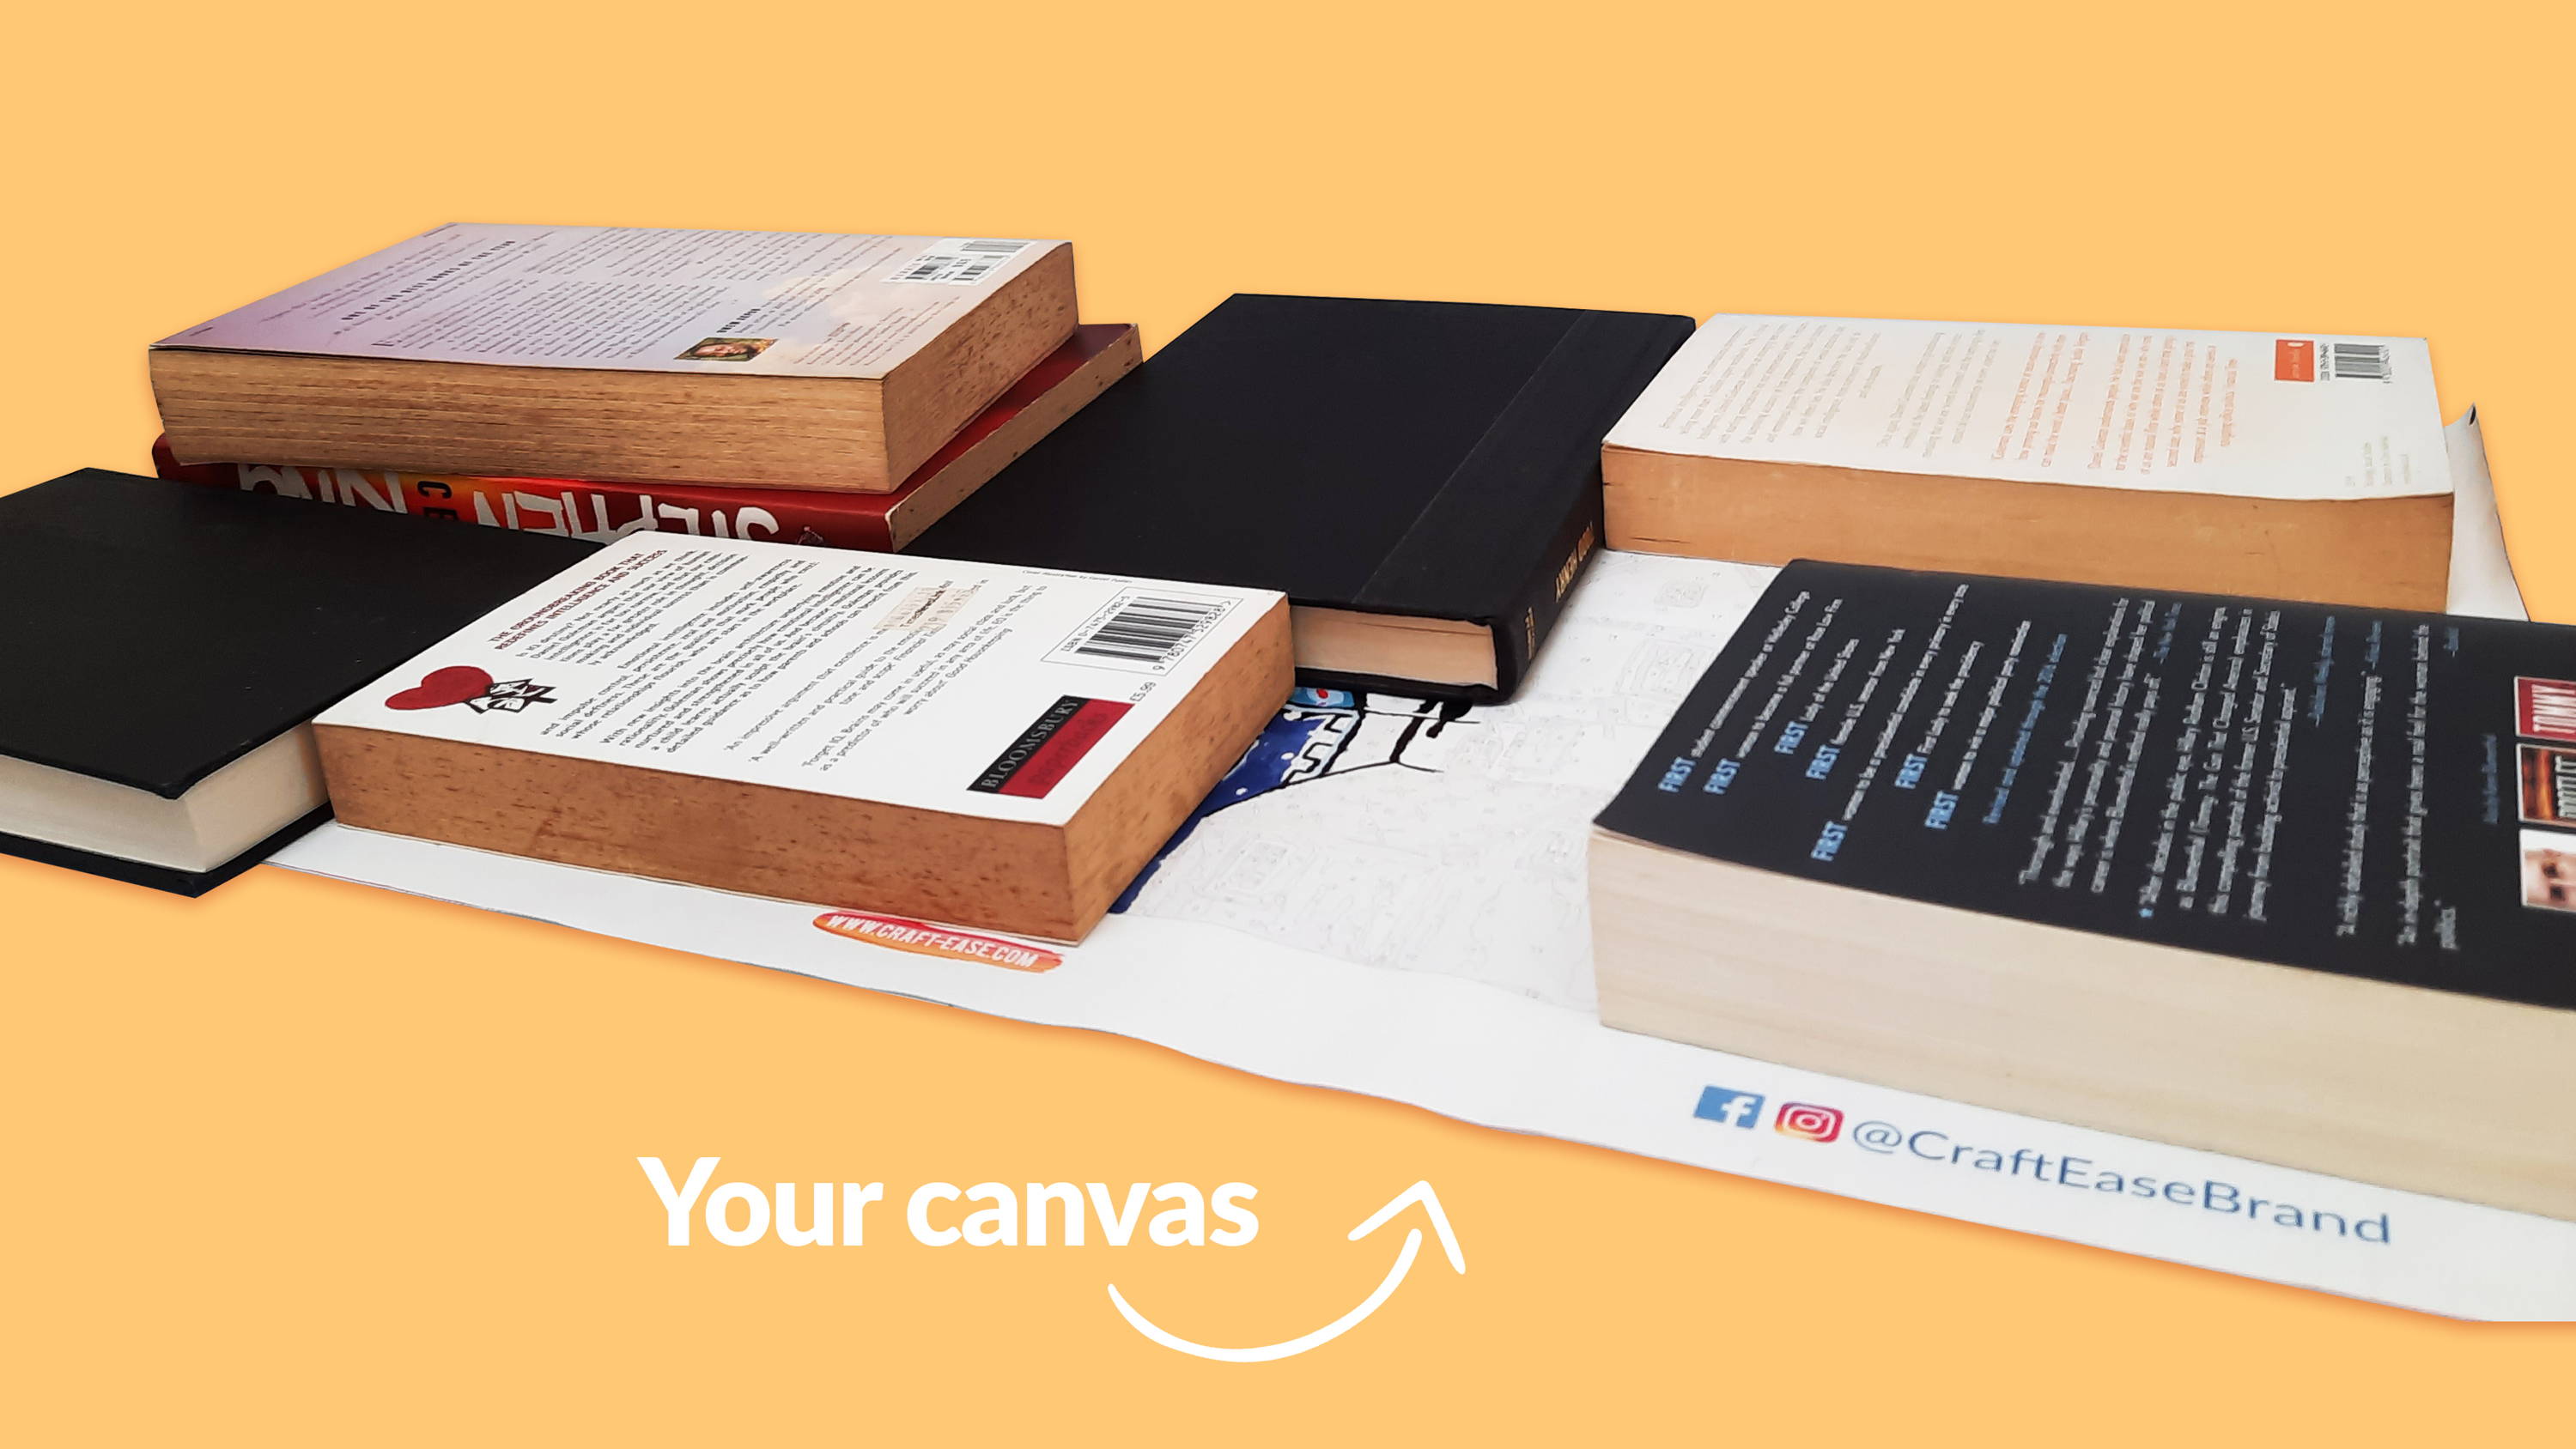 Weighing down your canvas, can keep them straight and smooth